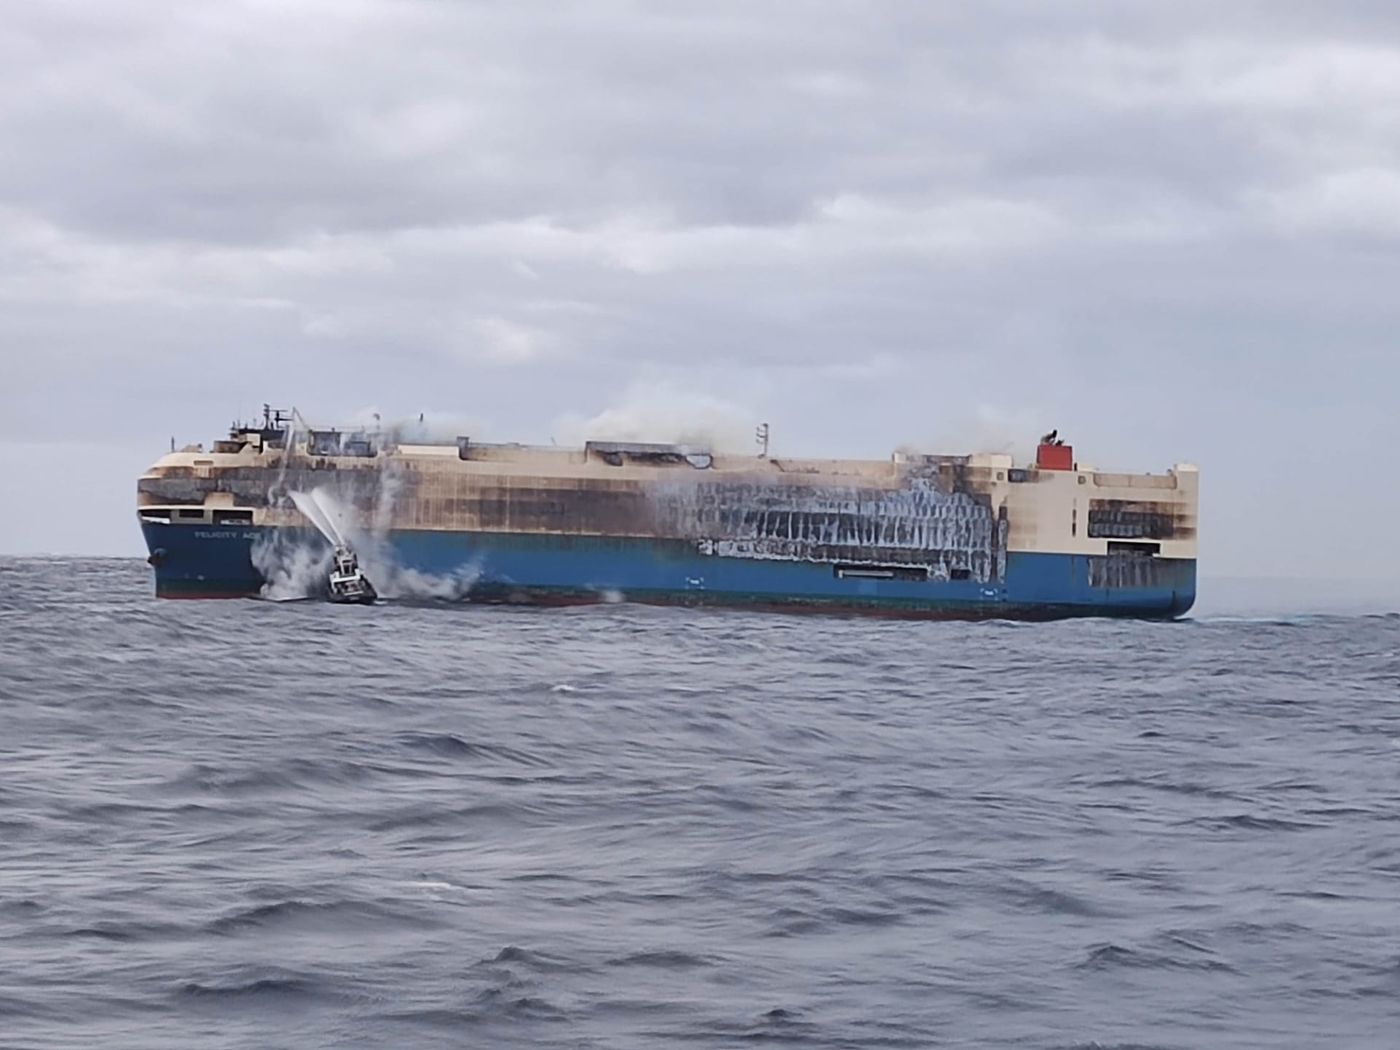 lithium-ion batteries in electric vehicles fuel cargo ship fire